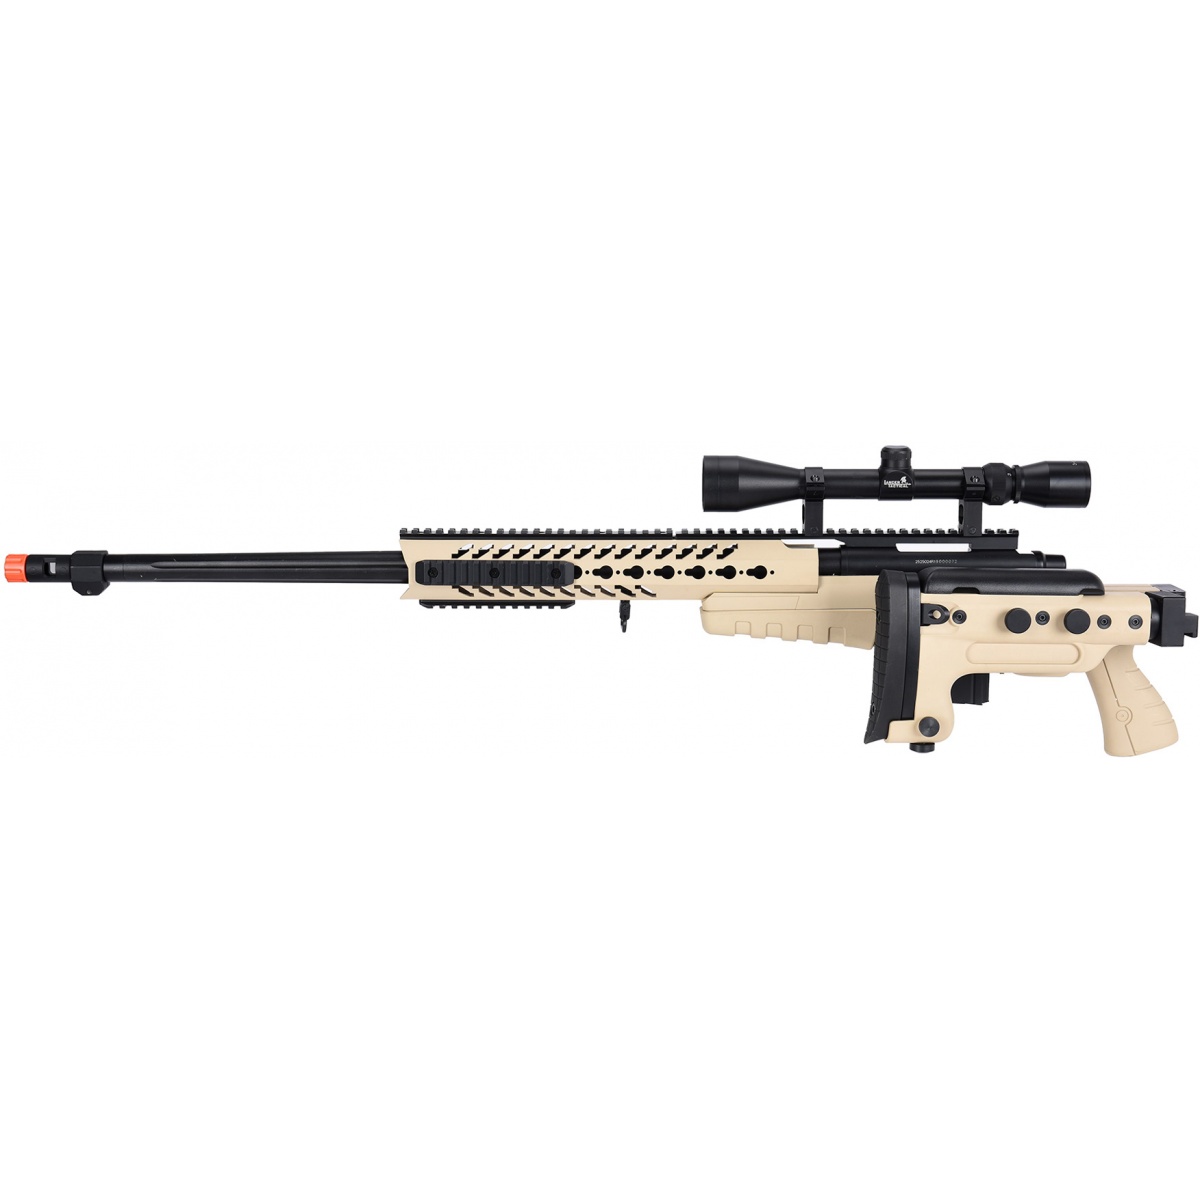 WellFire MB4418-3 Bolt Action Airsoft Sniper Rifle w/ Scope - TAN ...